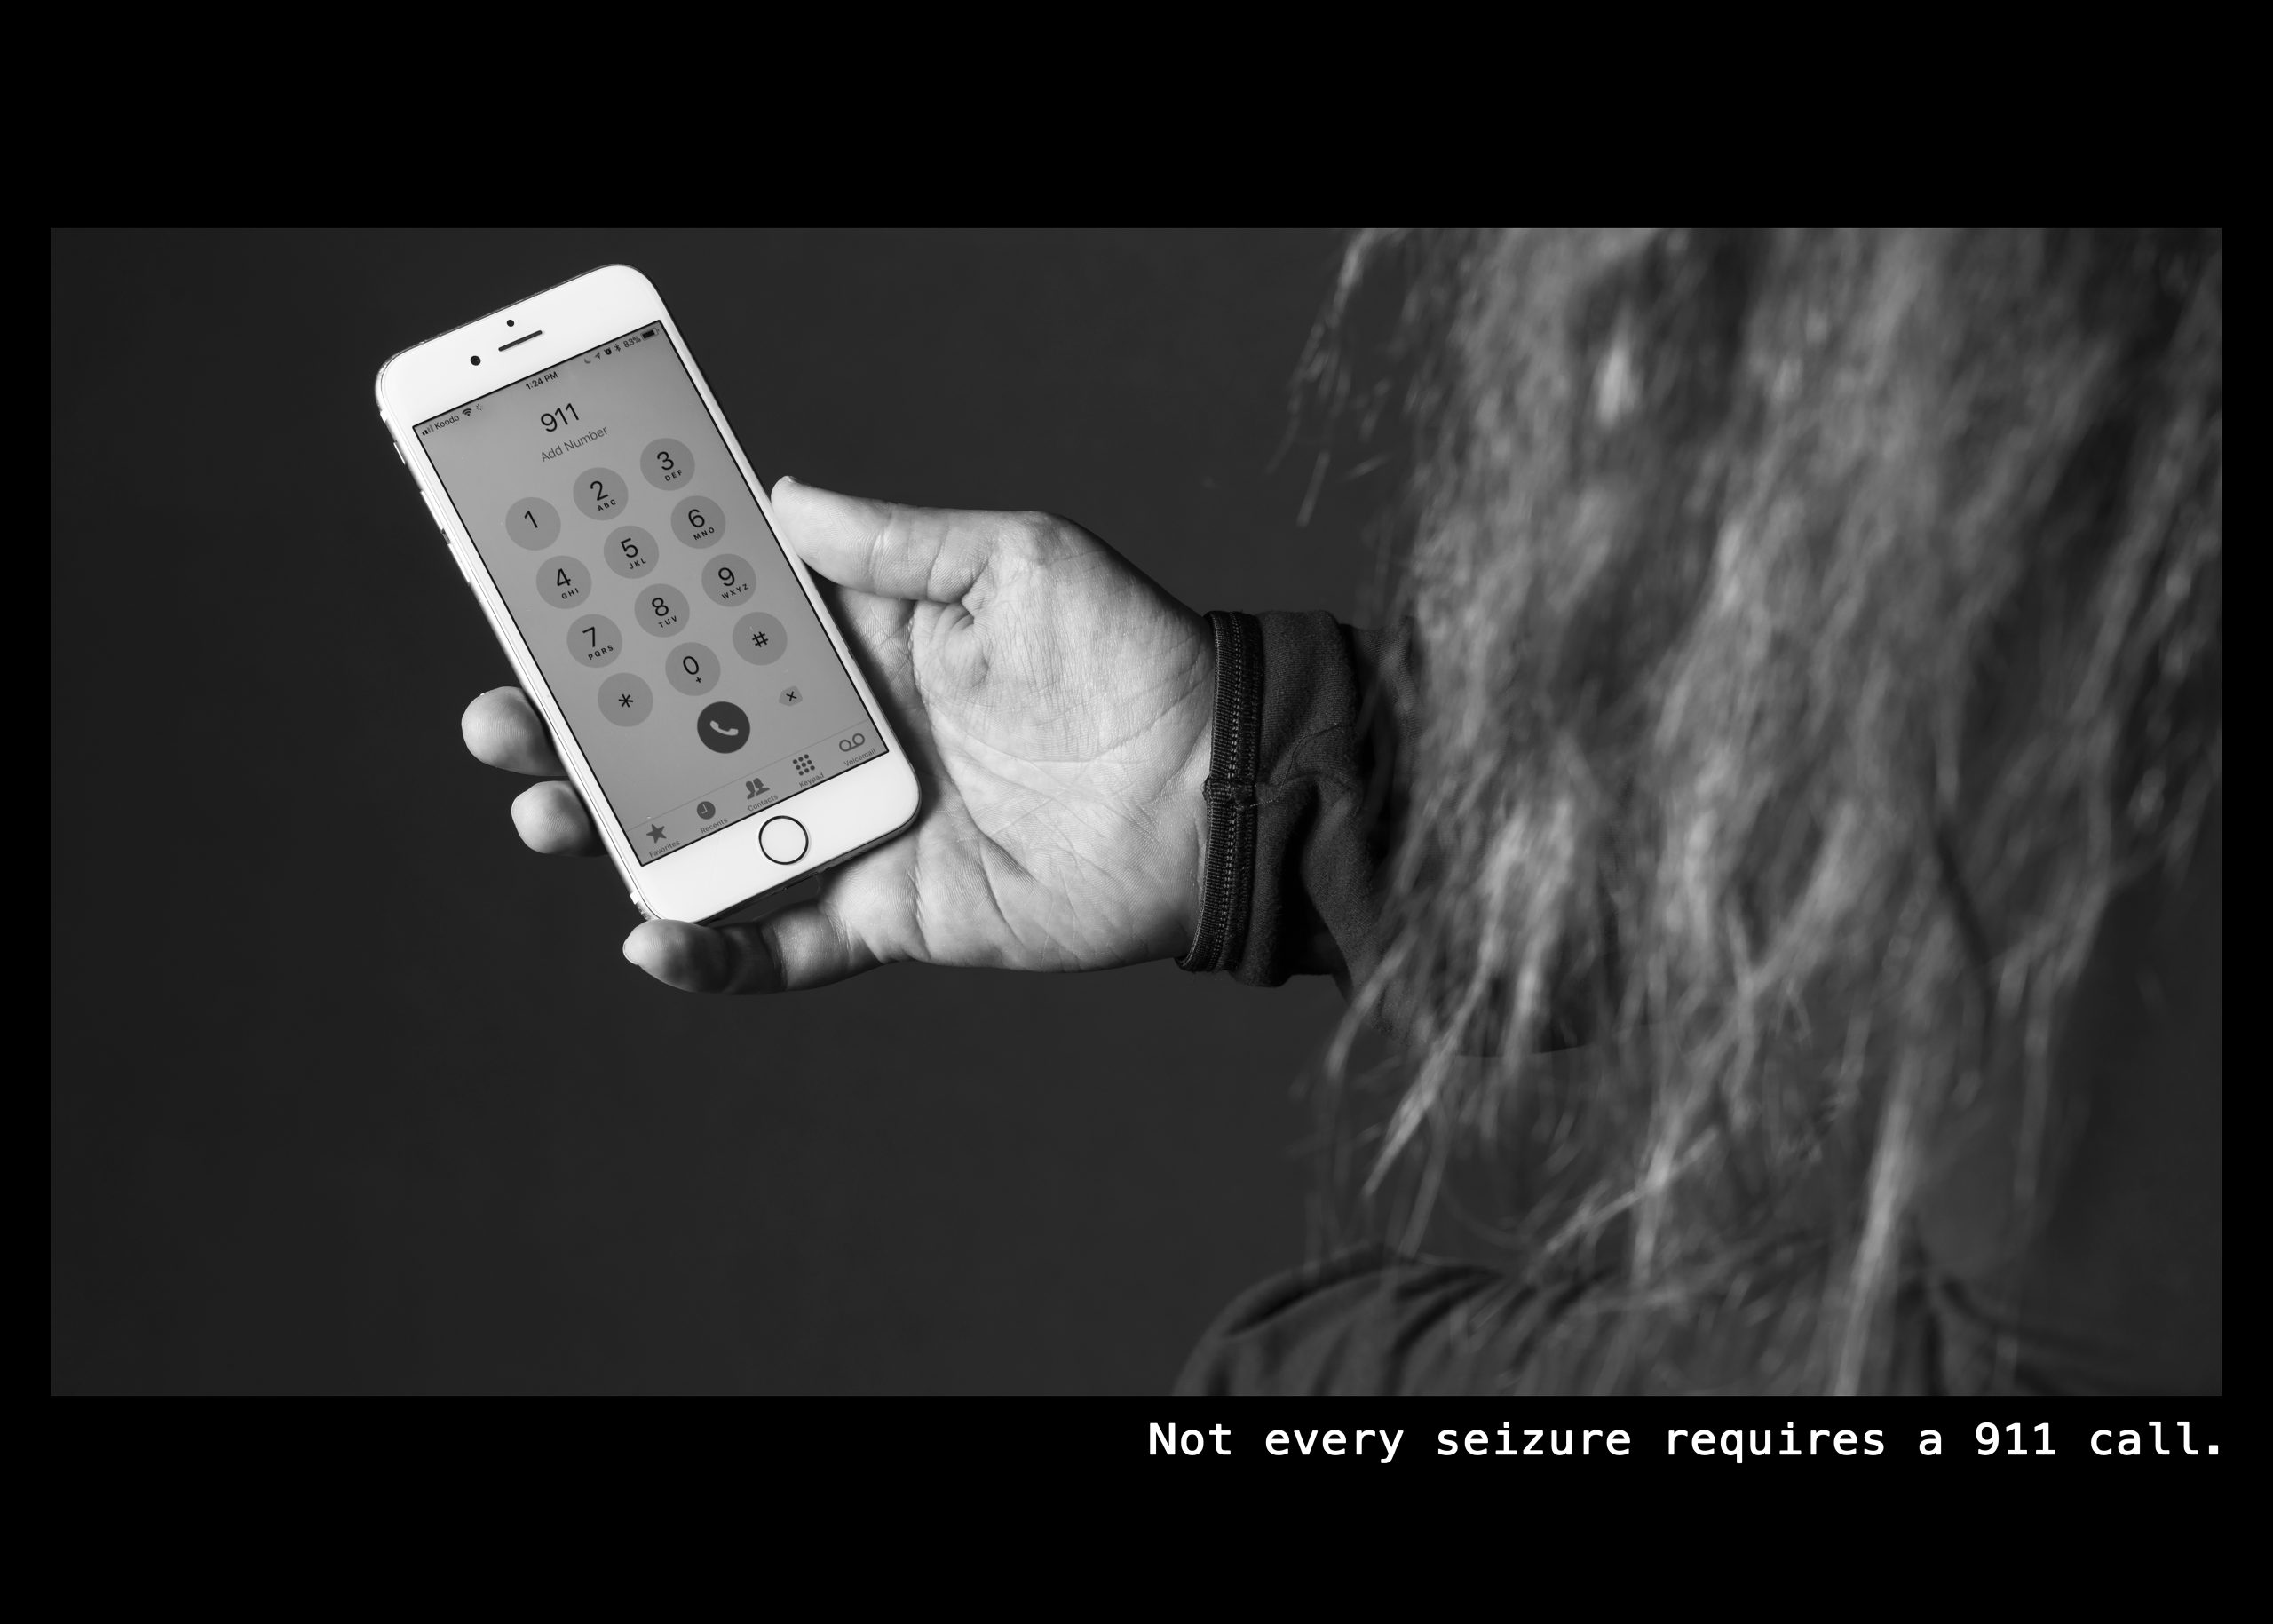 Image of a woman holding her cell phone and preparing to call 911. Text: Not every seizure requires a 911 call.